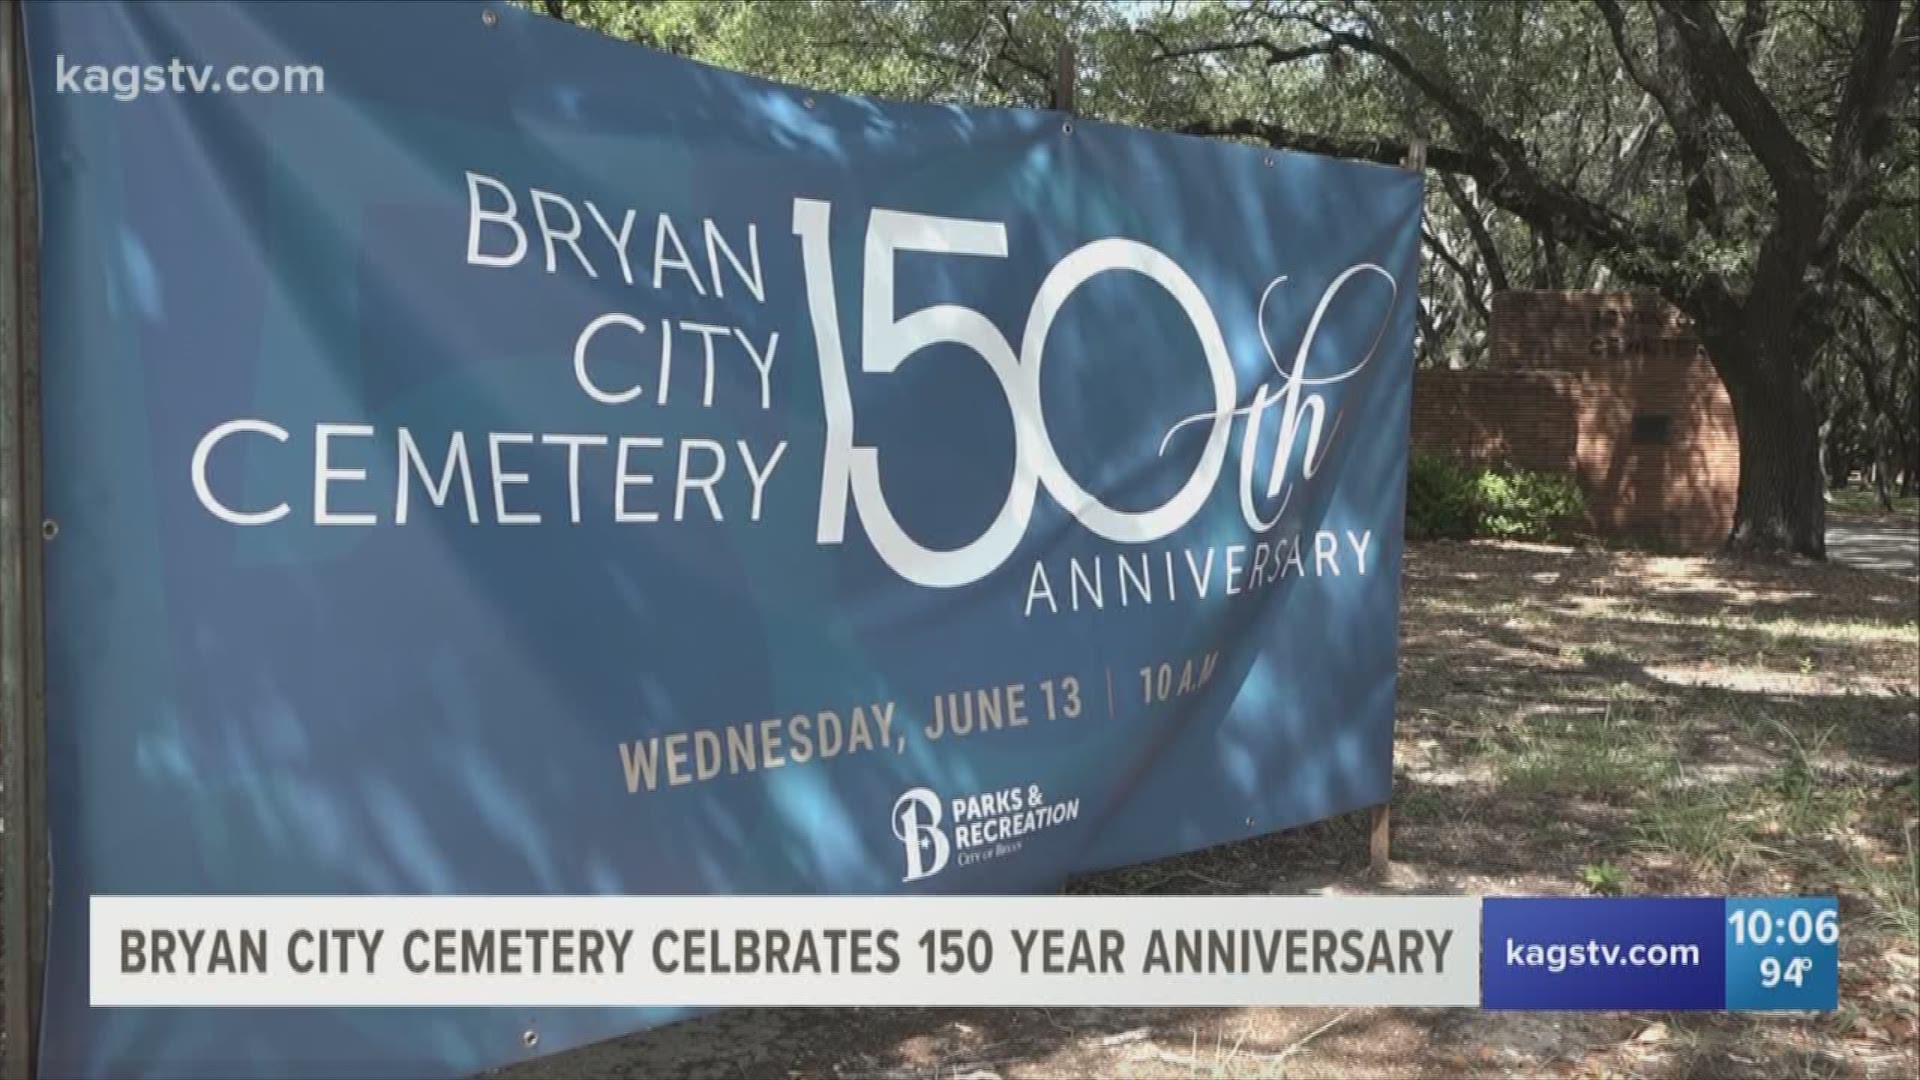 The City of Bryan has reached a big mile-stone, as they celebrate 150 years since the opening of the Bryan City Cemetery. Also, they reveal plans for expansion.